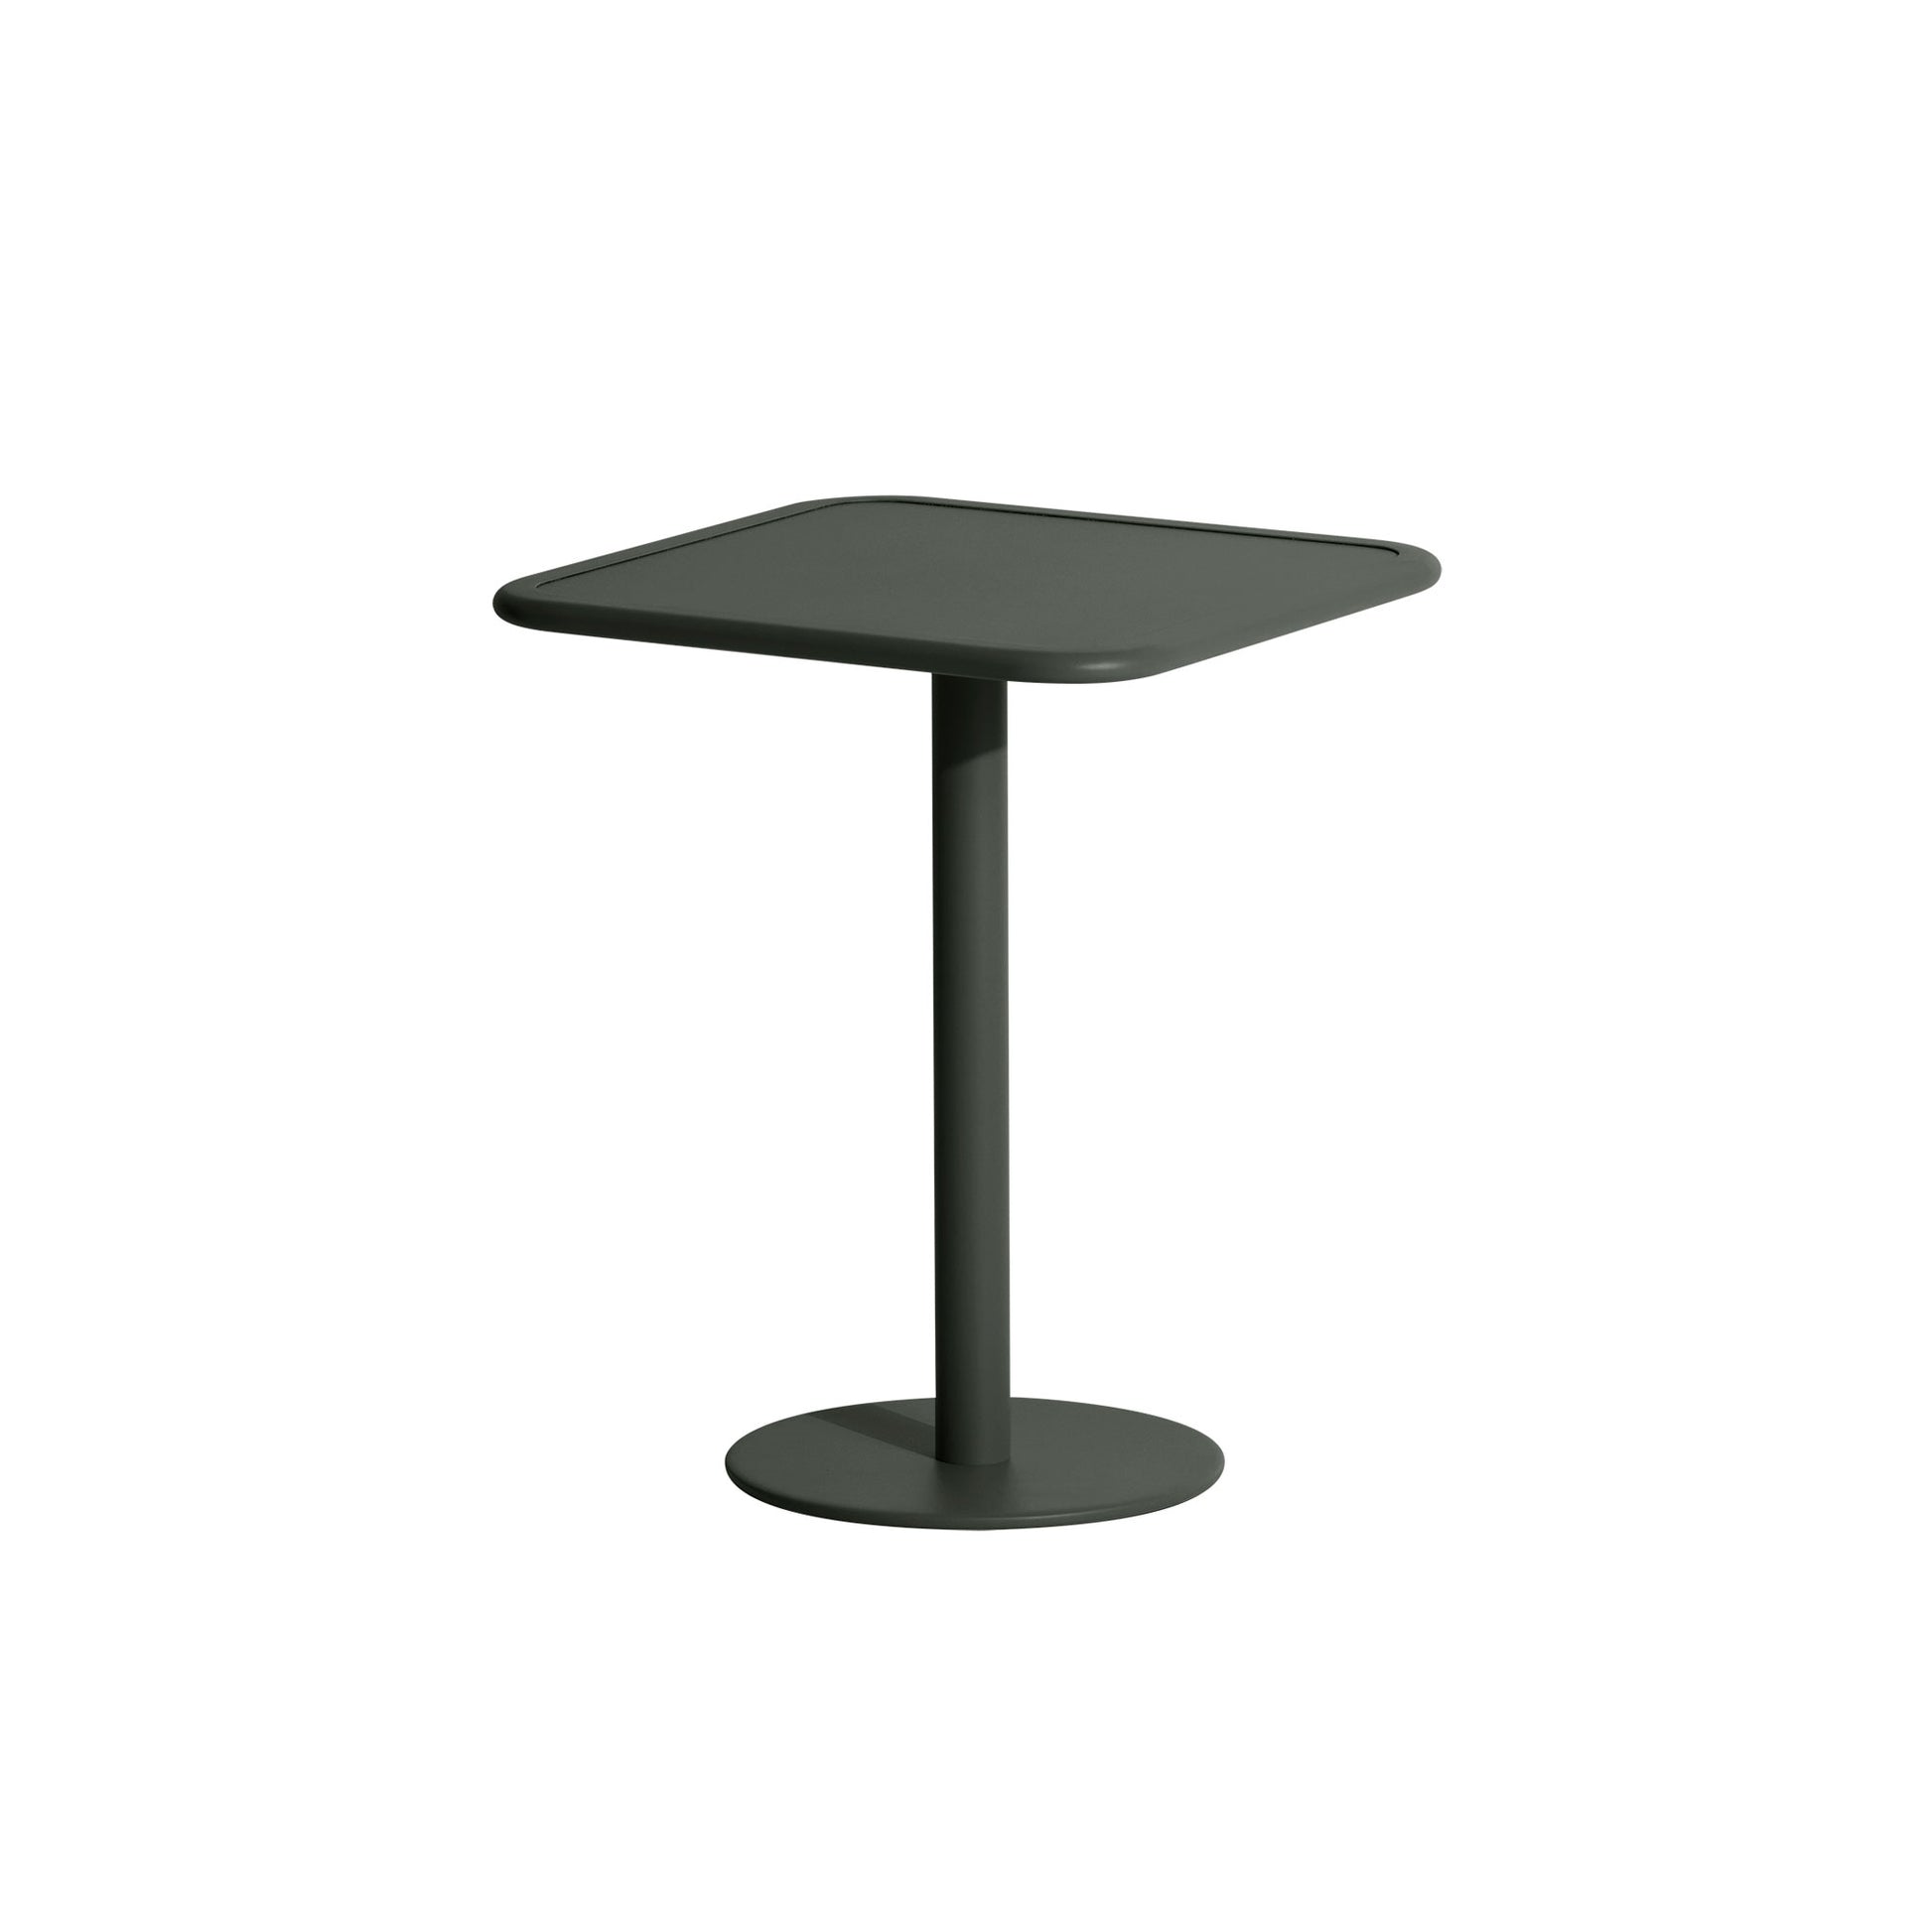 WEEK-END Square Café Table by Petite Friture #Glass Green